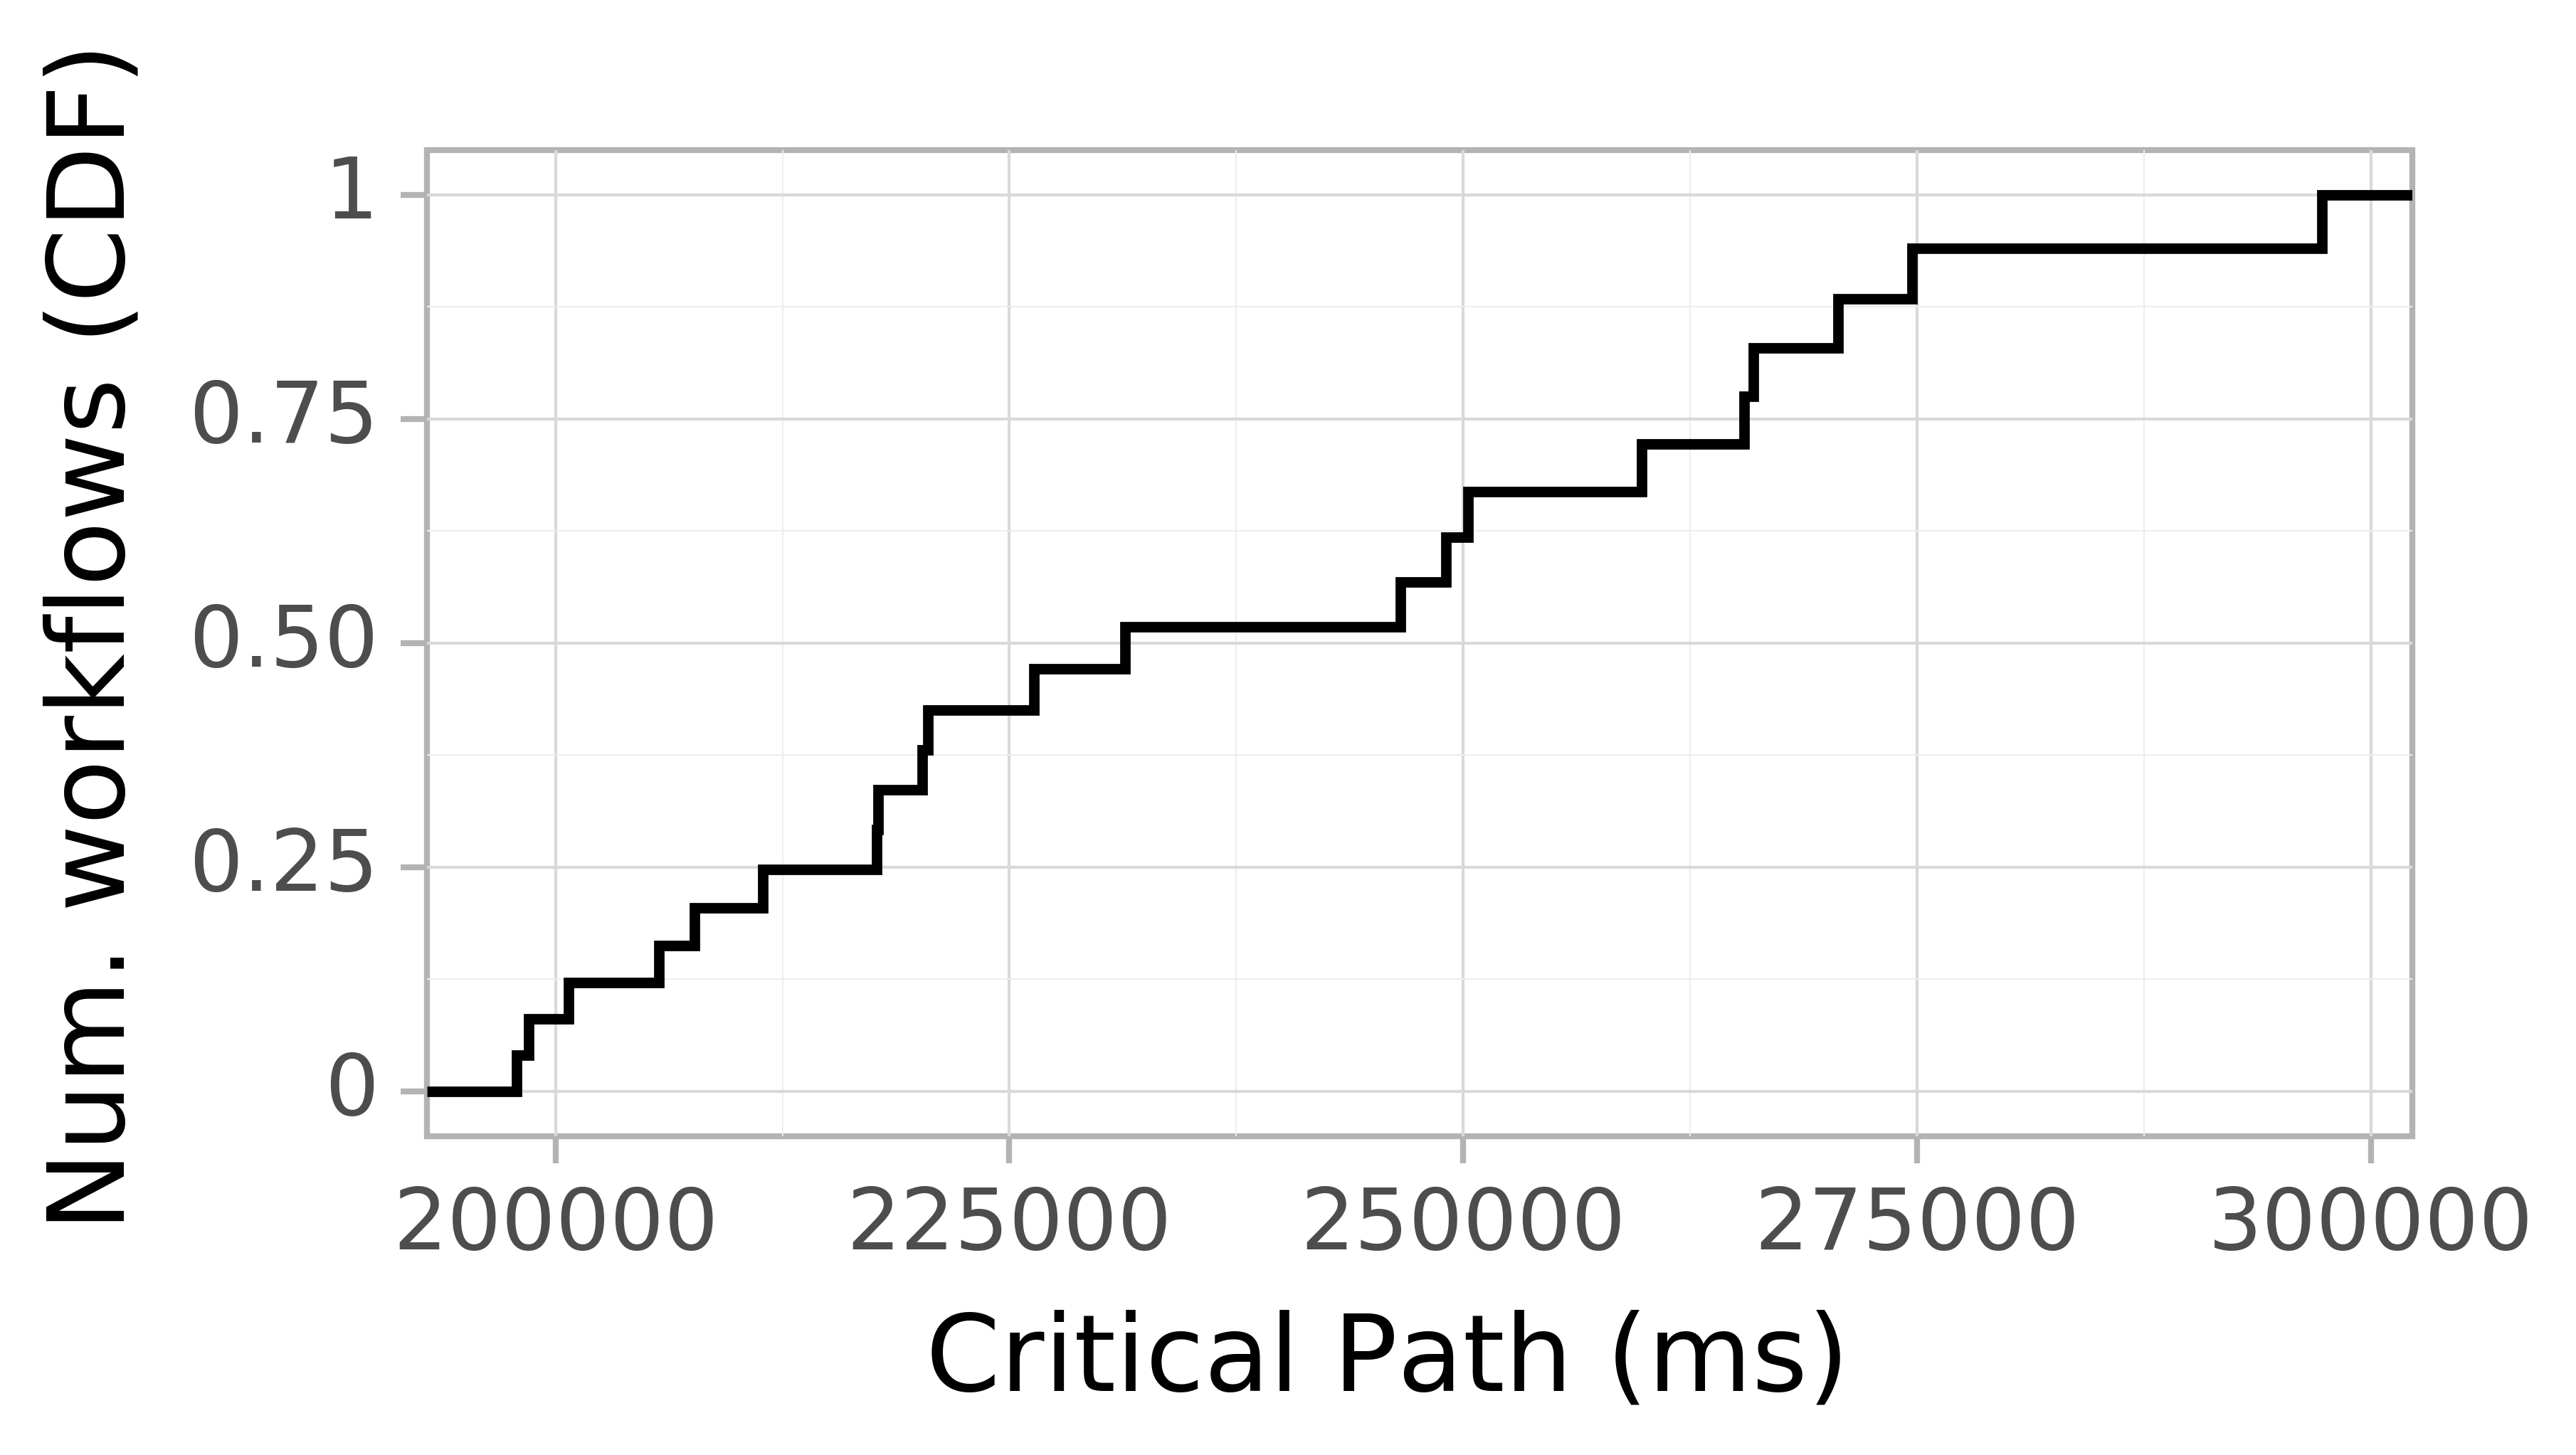 Job runtime CDF graph for the askalon-new_ee32 trace.